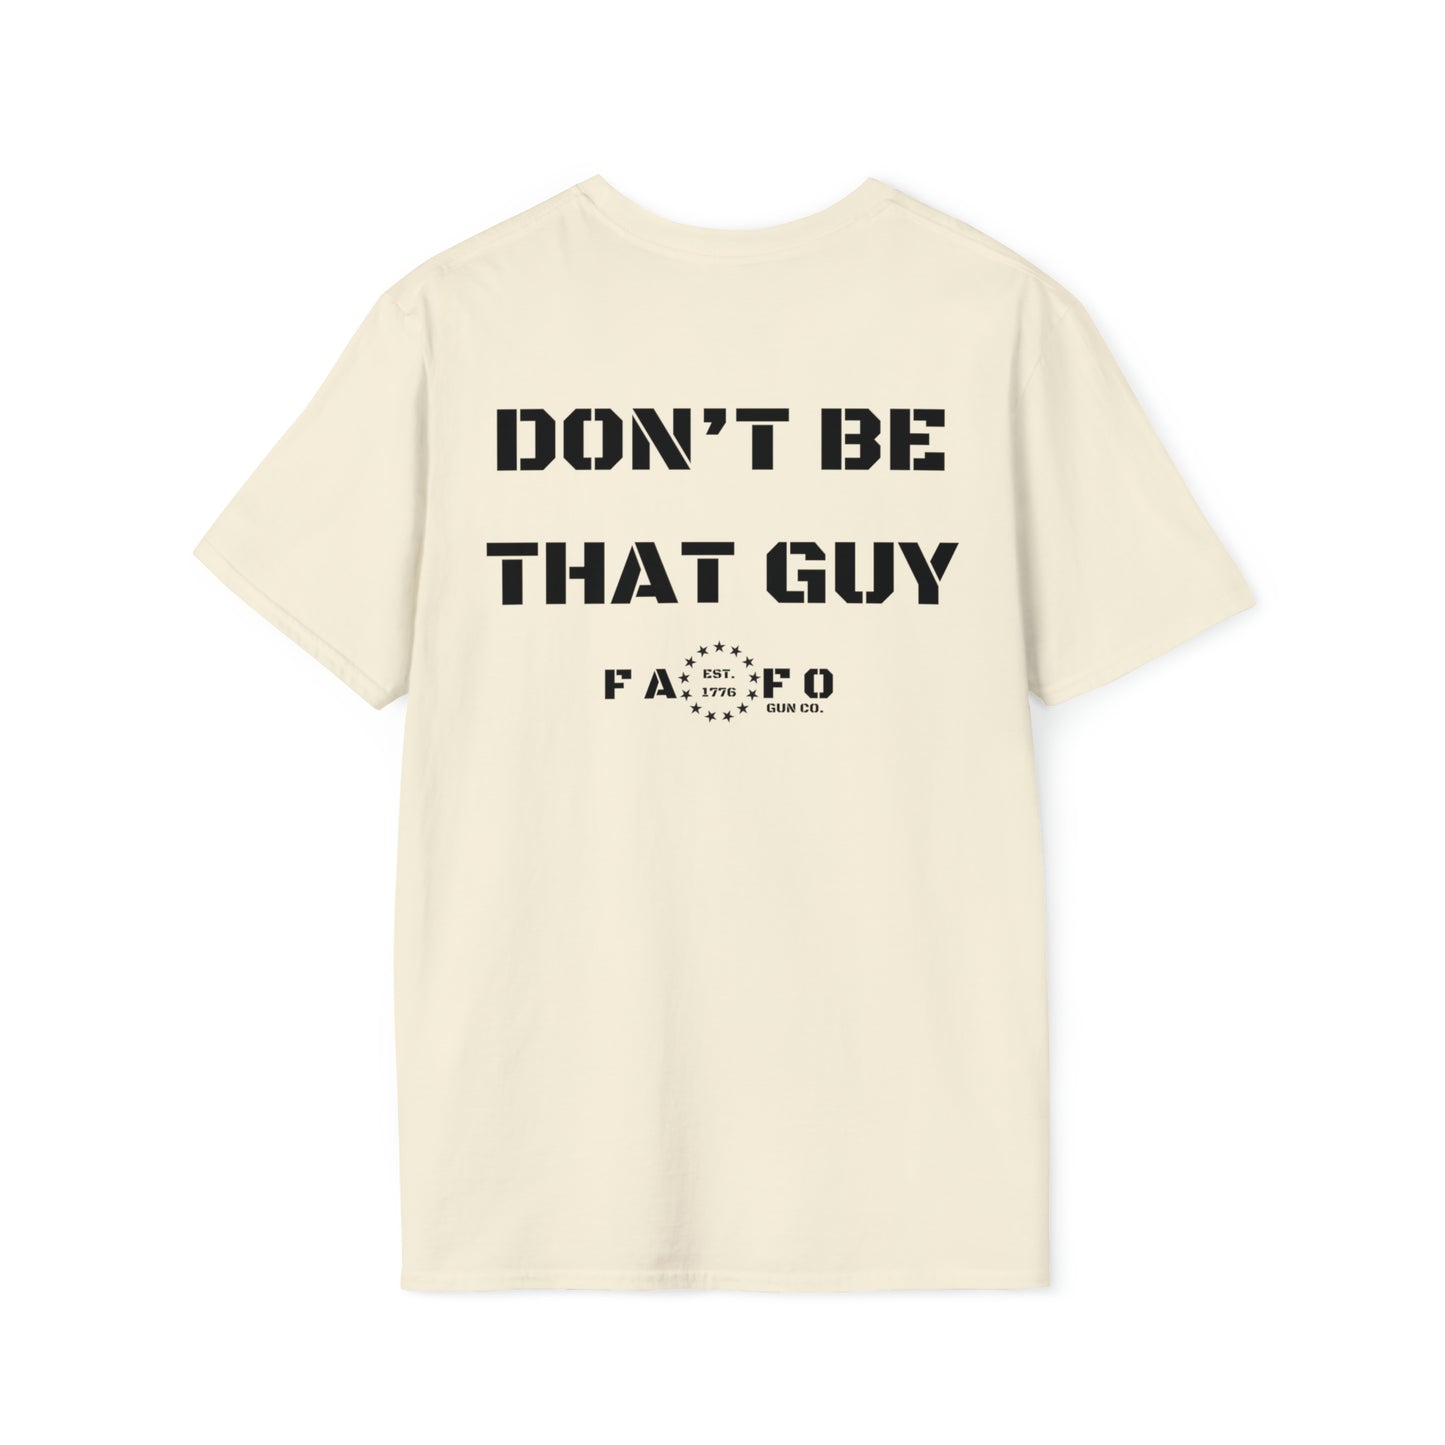 “DON’T BE THAT GUY” Tee (Print on Back)